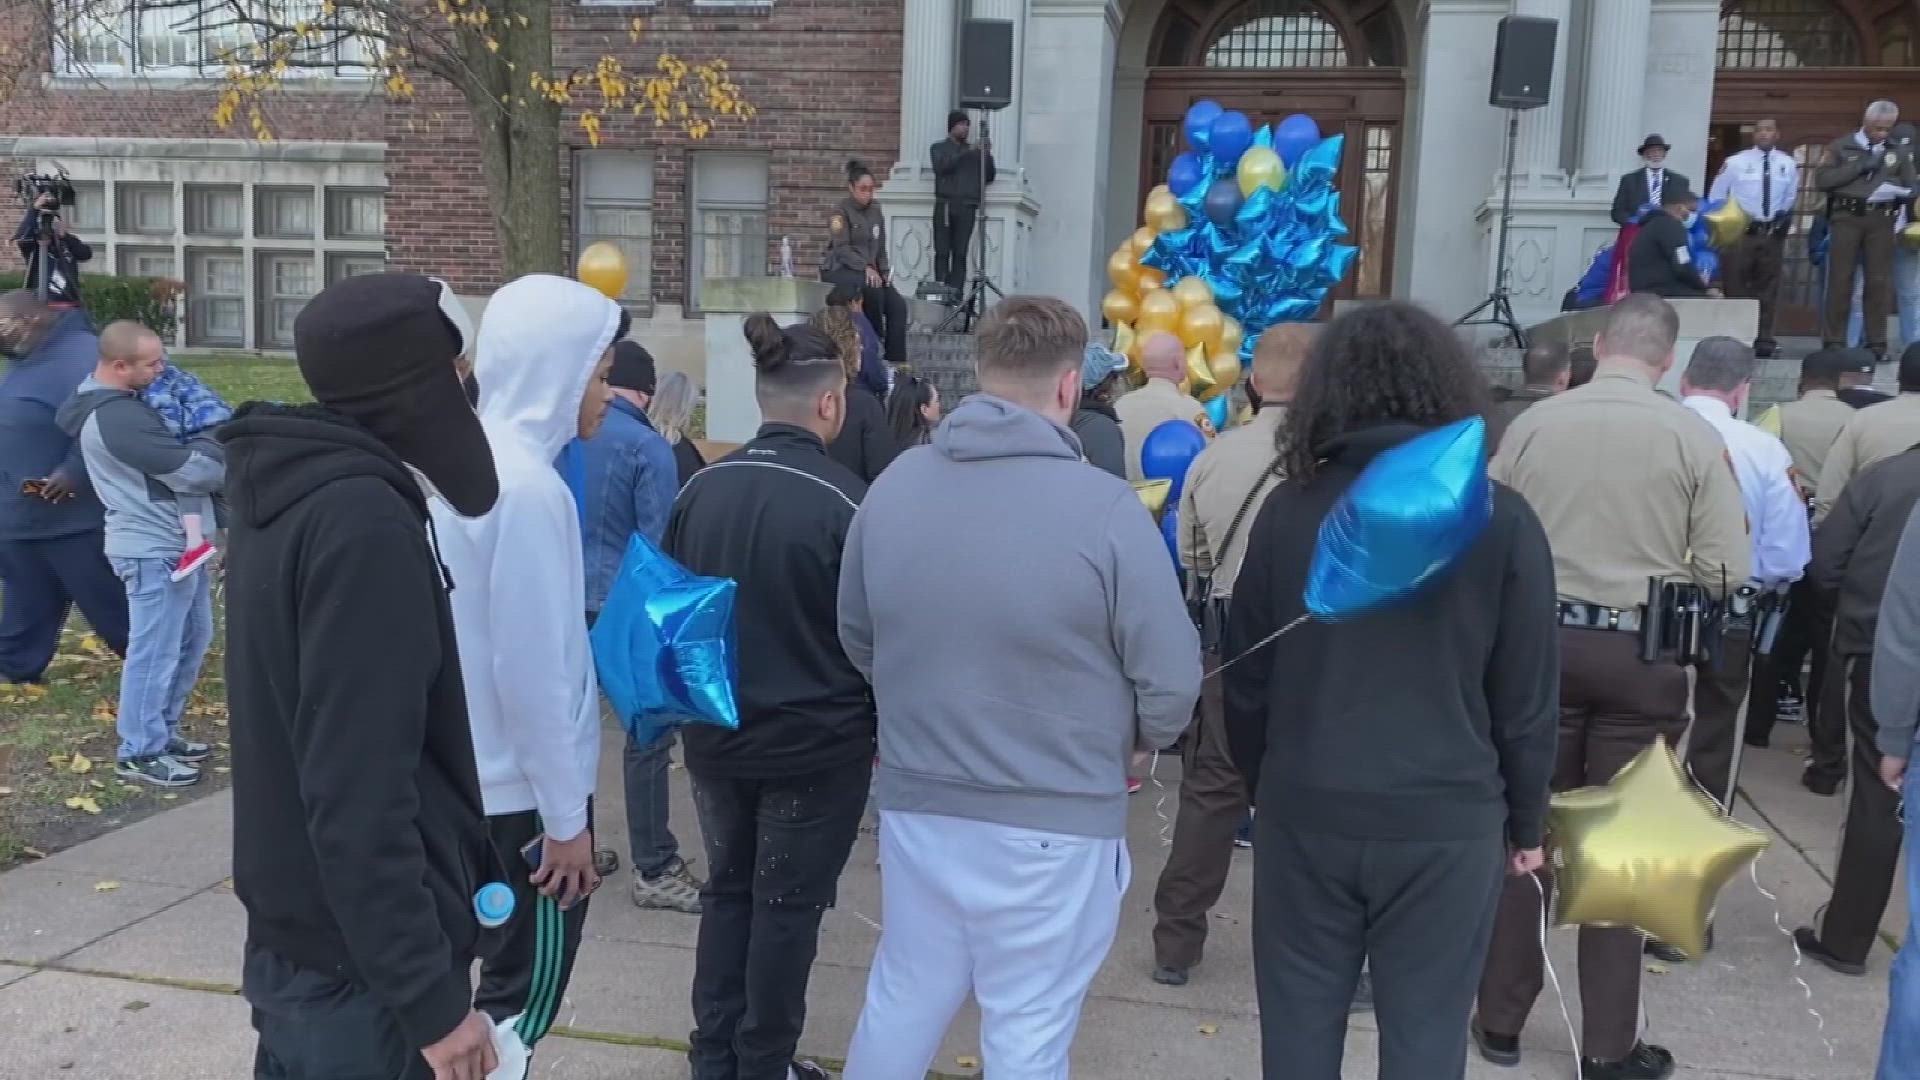 Family and friends gathered to honor Detective Antonio Valentine